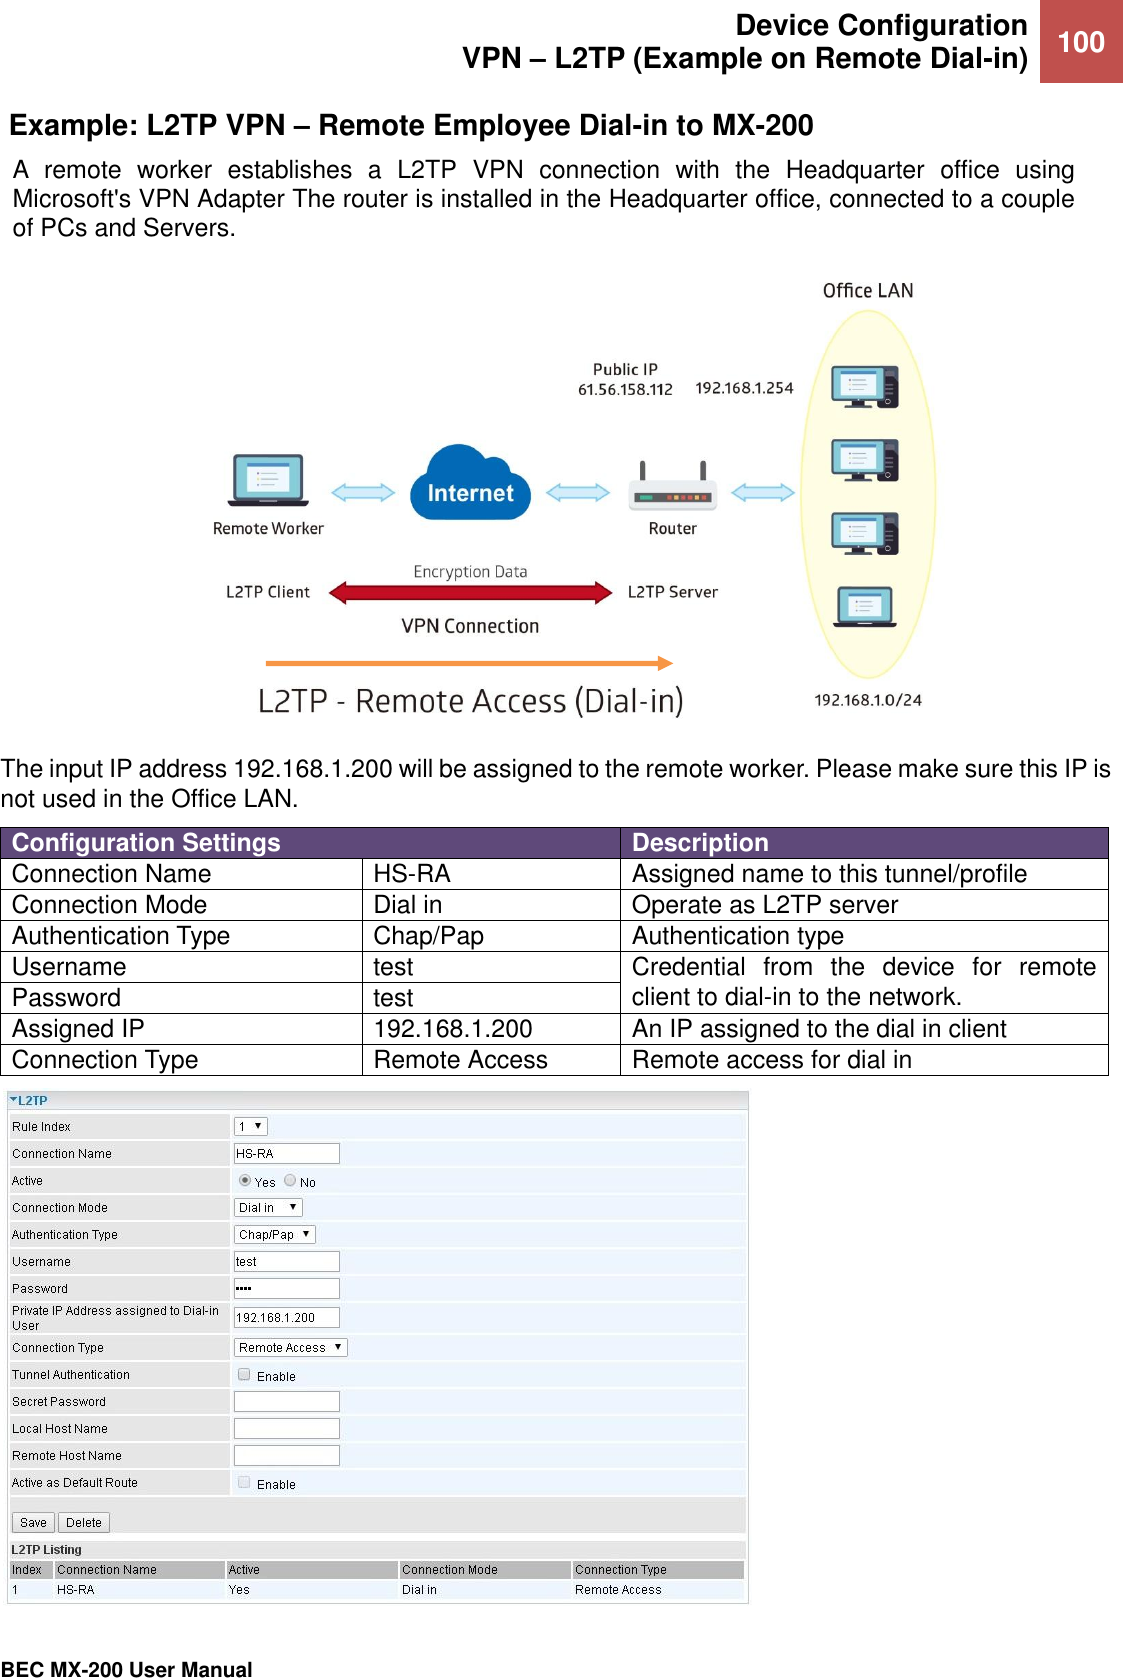  Device Configuration VPN – L2TP (Example on Remote Dial-in) 100   BEC MX-200 User Manual   Example: L2TP VPN – Remote Employee Dial-in to MX-200 A  remote  worker  establishes  a  L2TP  VPN  connection  with  the  Headquarter  office  using Microsoft&apos;s VPN Adapter The router is installed in the Headquarter office, connected to a couple of PCs and Servers.  The input IP address 192.168.1.200 will be assigned to the remote worker. Please make sure this IP is not used in the Office LAN. Configuration Settings Description Connection Name HS-RA Assigned name to this tunnel/profile Connection Mode Dial in Operate as L2TP server Authentication Type Chap/Pap Authentication type Username test Credential  from  the  device  for  remote client to dial-in to the network.   Password test Assigned IP 192.168.1.200 An IP assigned to the dial in client Connection Type Remote Access Remote access for dial in 